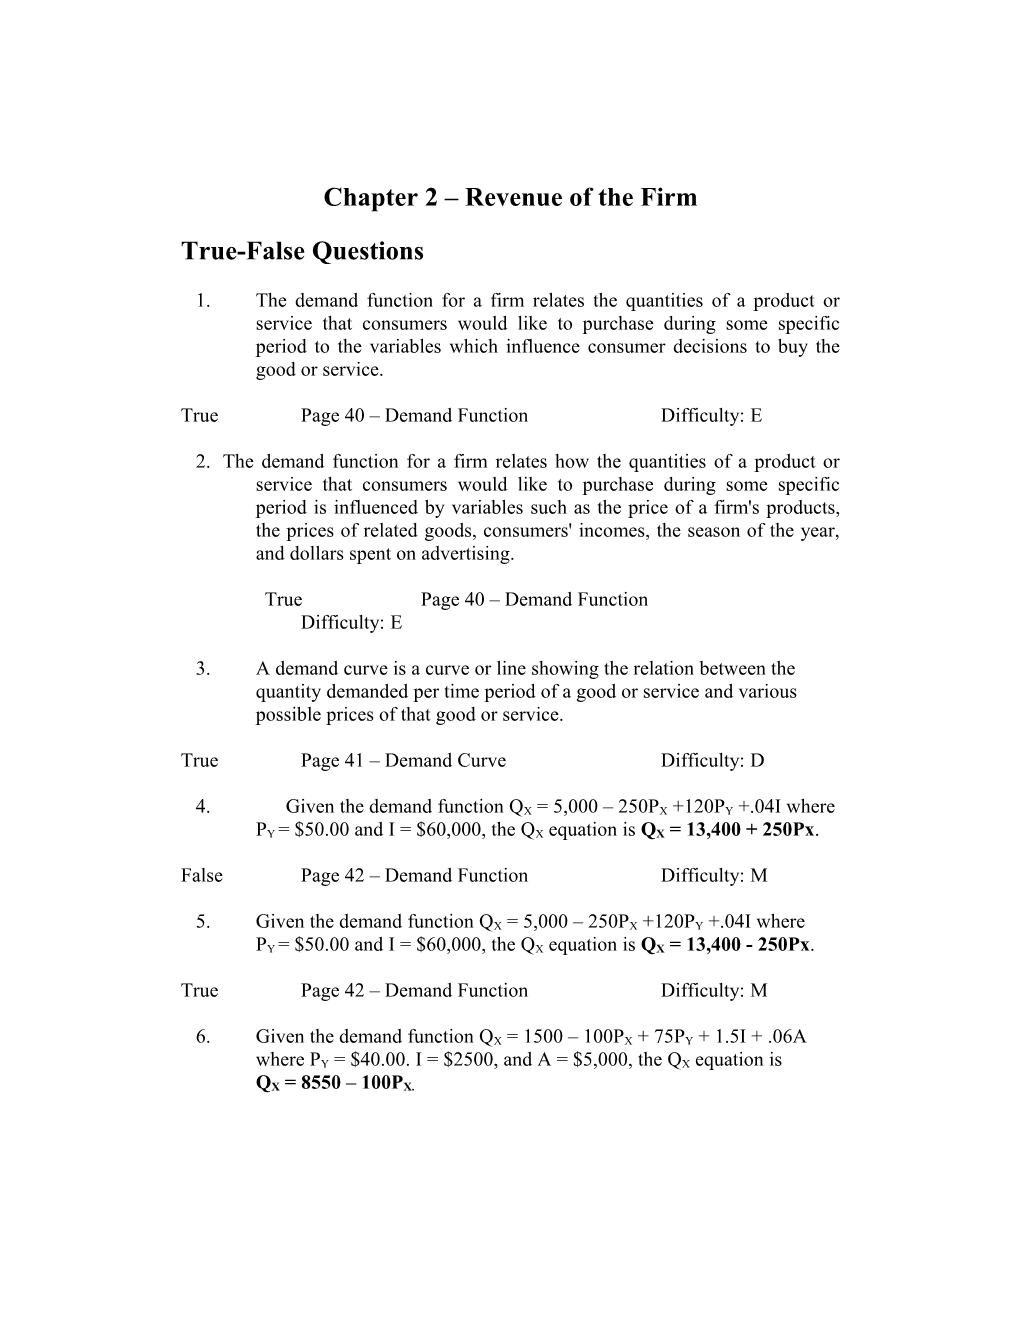 Chapter 2 Revenue of the Firm